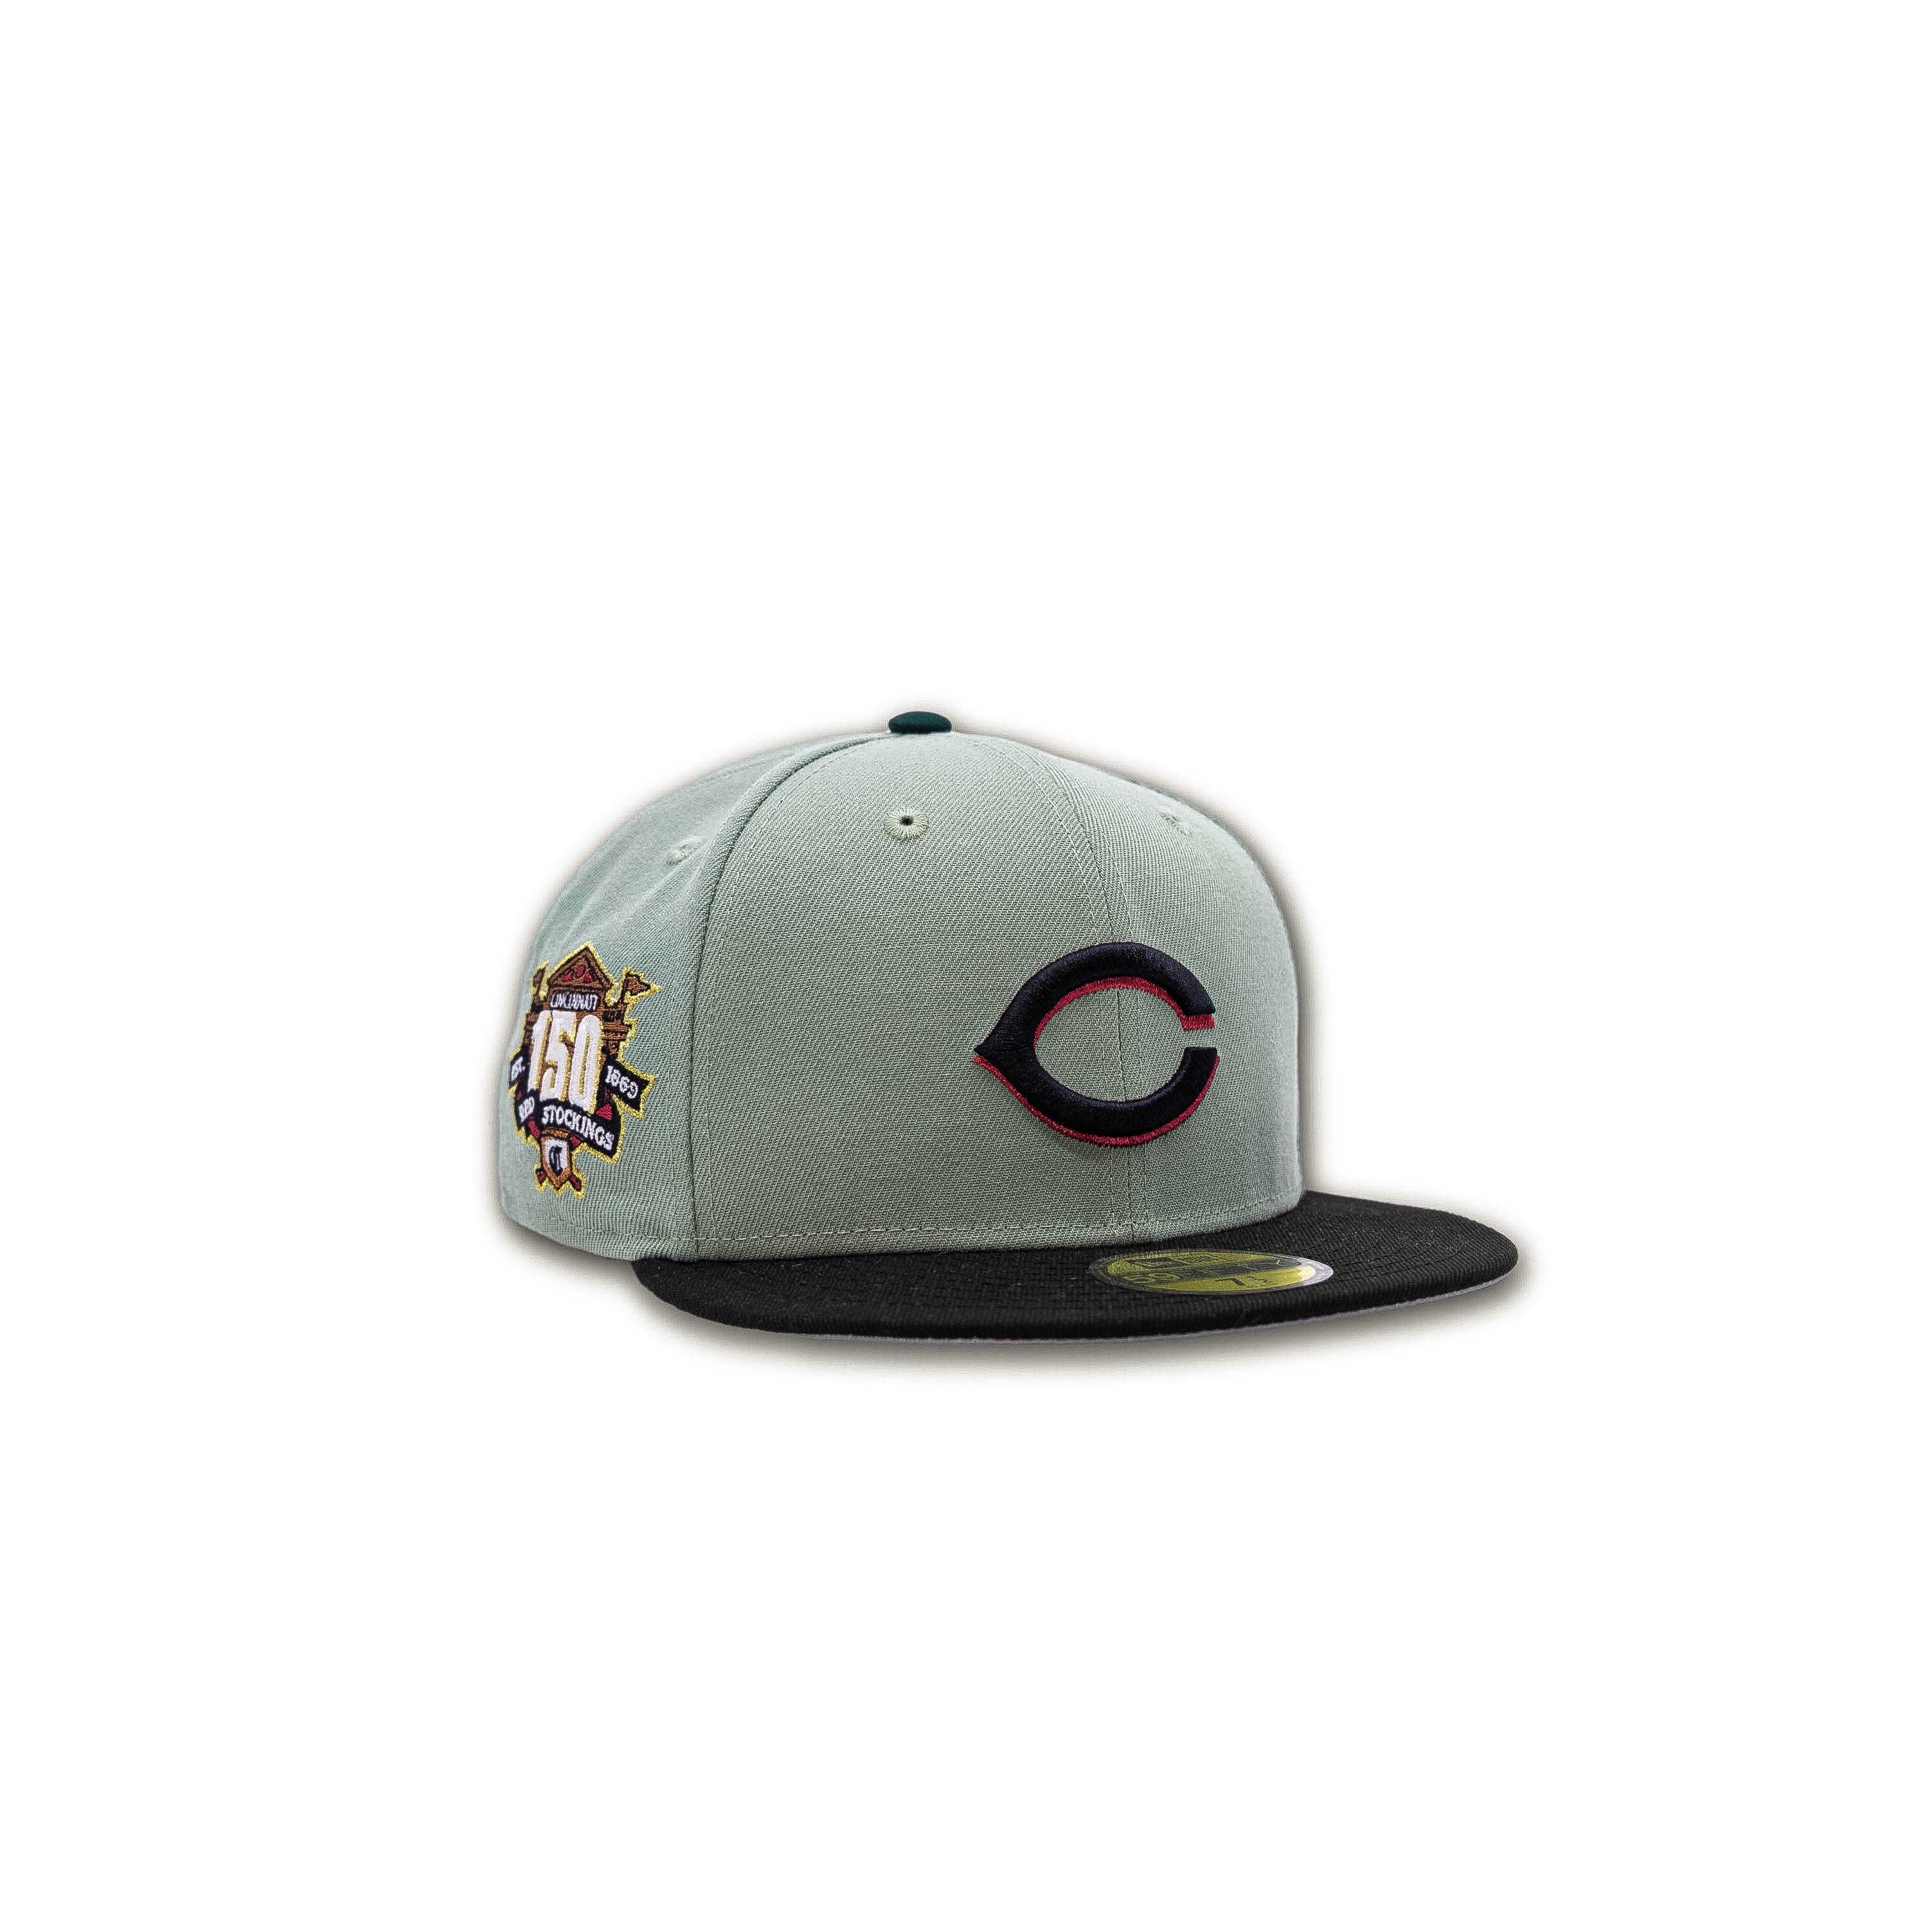 New Era Cincinnati Reds 150th Anniversary Patch Fitted – All The Right